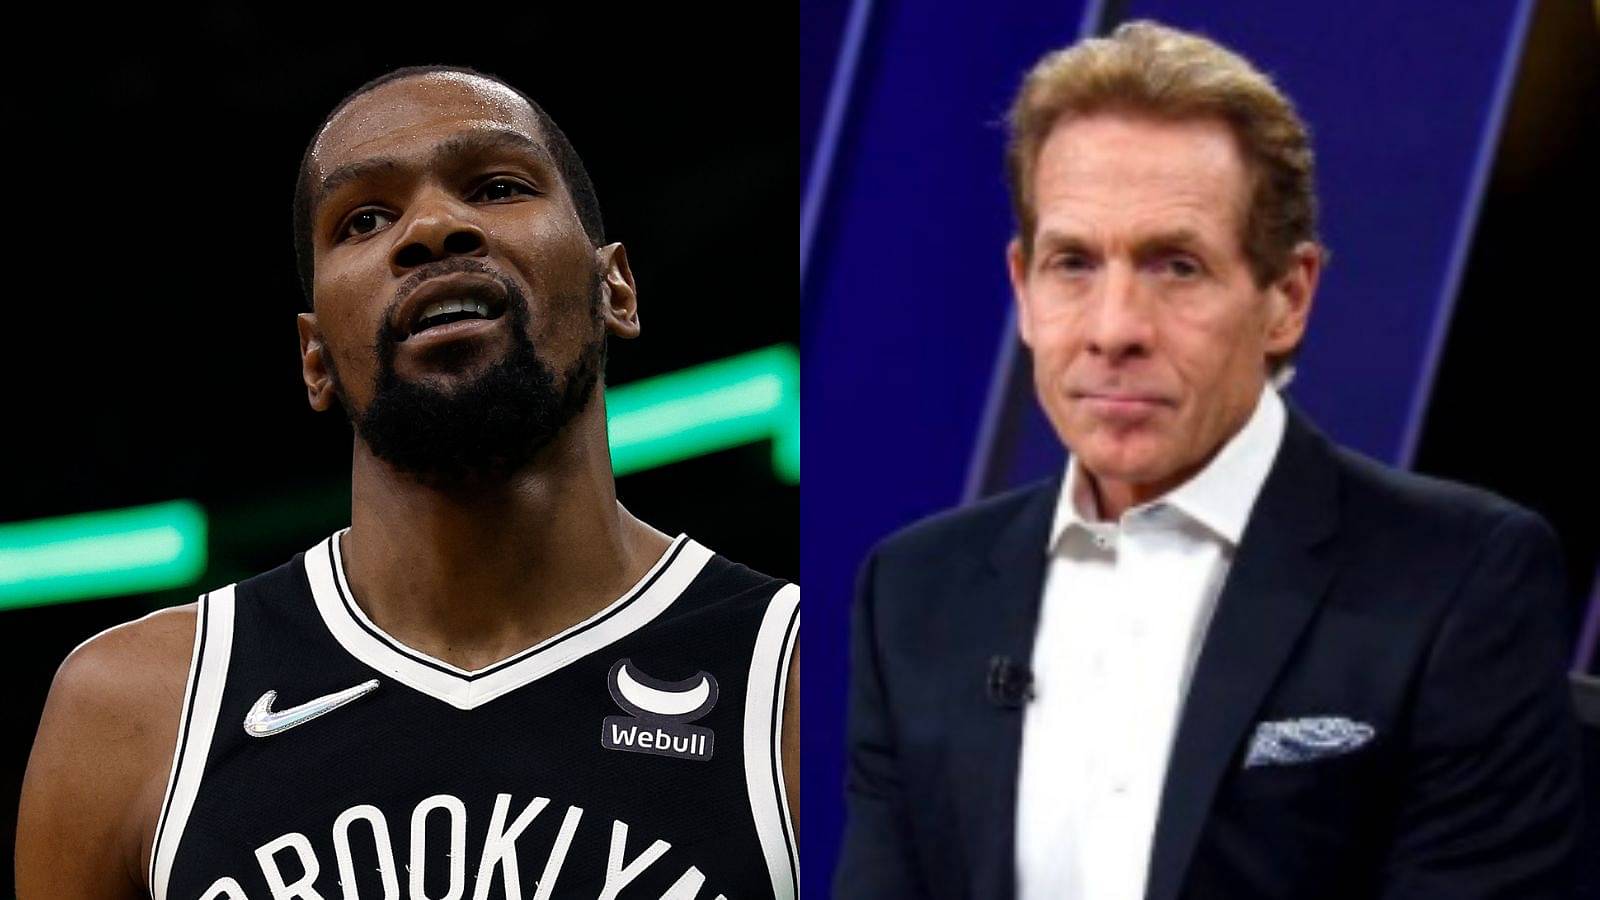 “Kevin Durant forcing trade with 4 YEARS LEFT on a $194 million contract is bad for NBA”: Skip Bayless lays out the league's difference from NFL that is making it fall behind in ratings